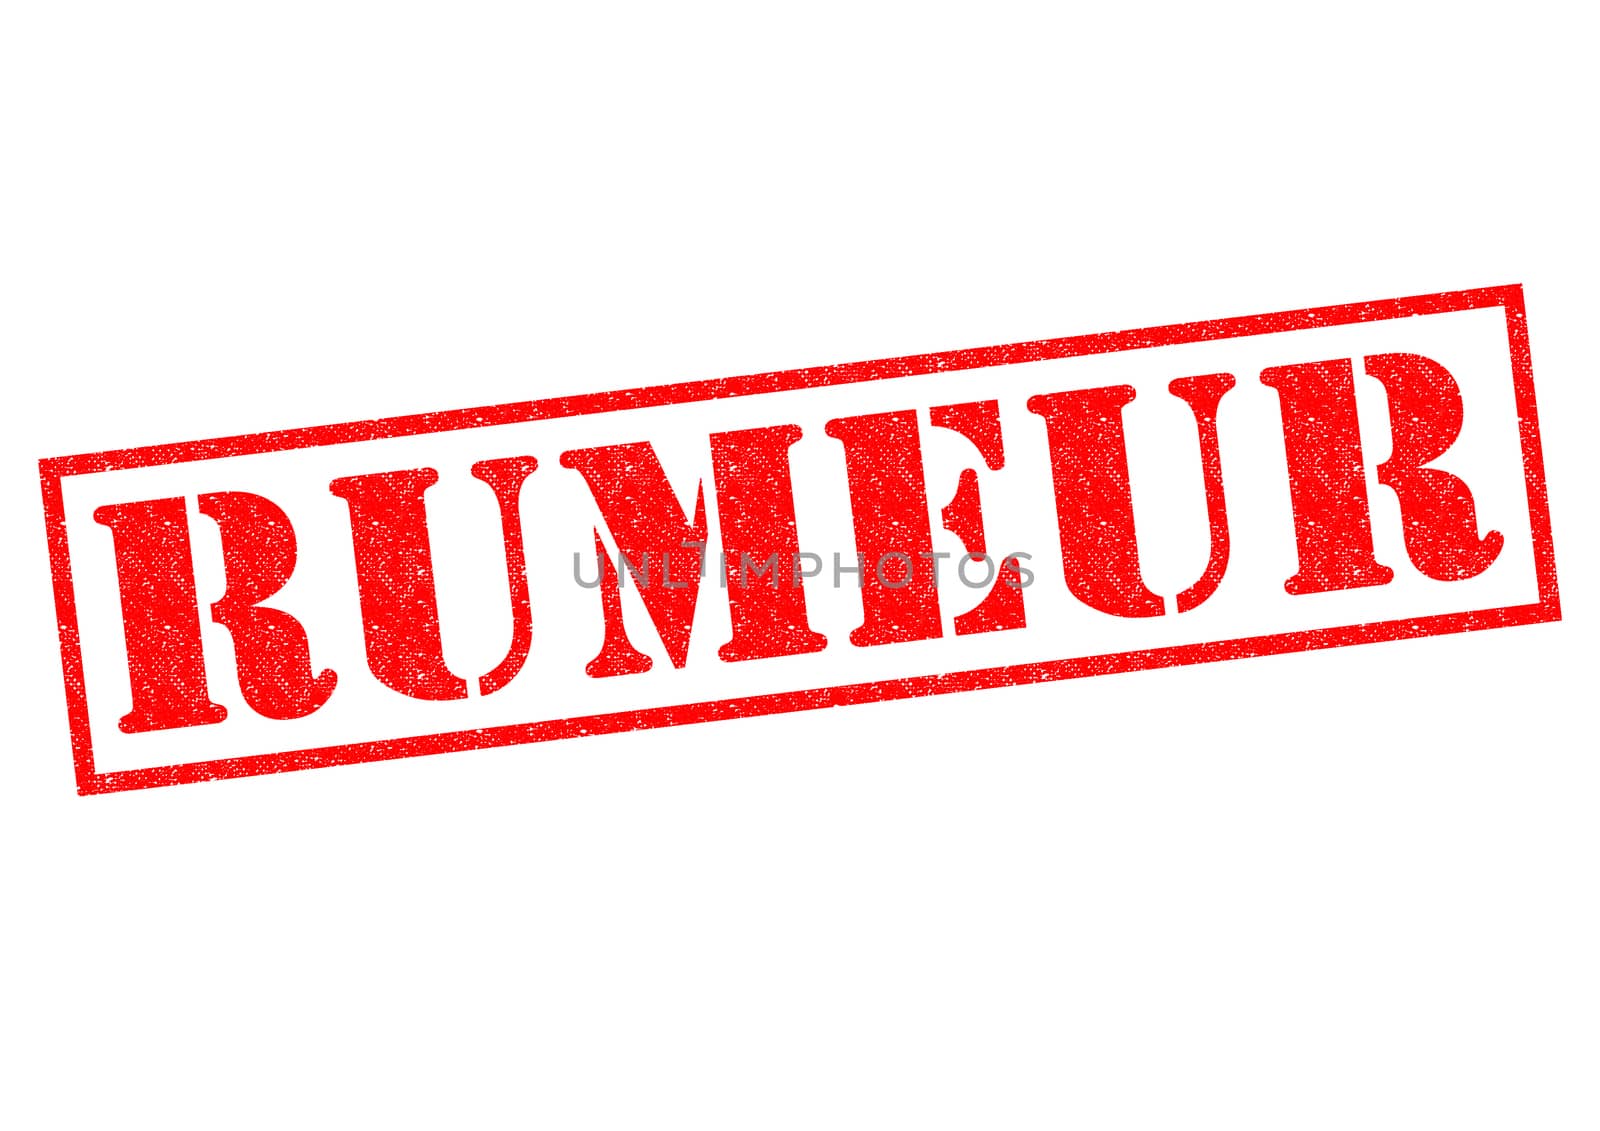 RUMEUR (RUMOR in the French language) red Rubber Stamp over a white background.